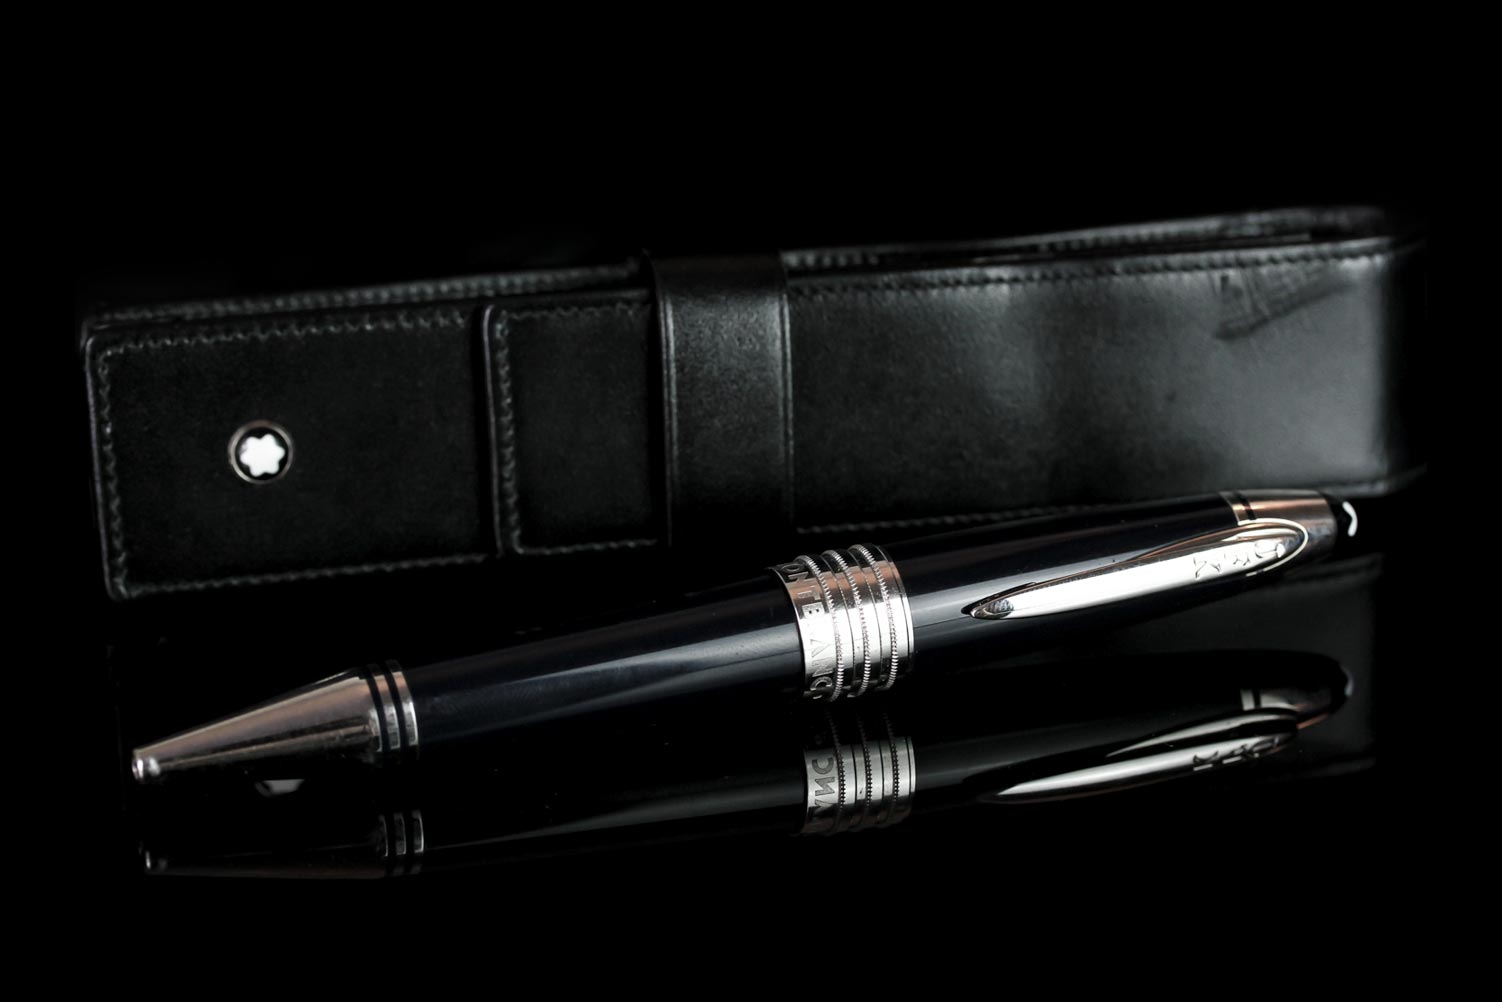 GENTLEMANS MONT BLANC JFK BALLPOINT PROPELLING PEN,MBJH4G302,black resin and white metal, comes with